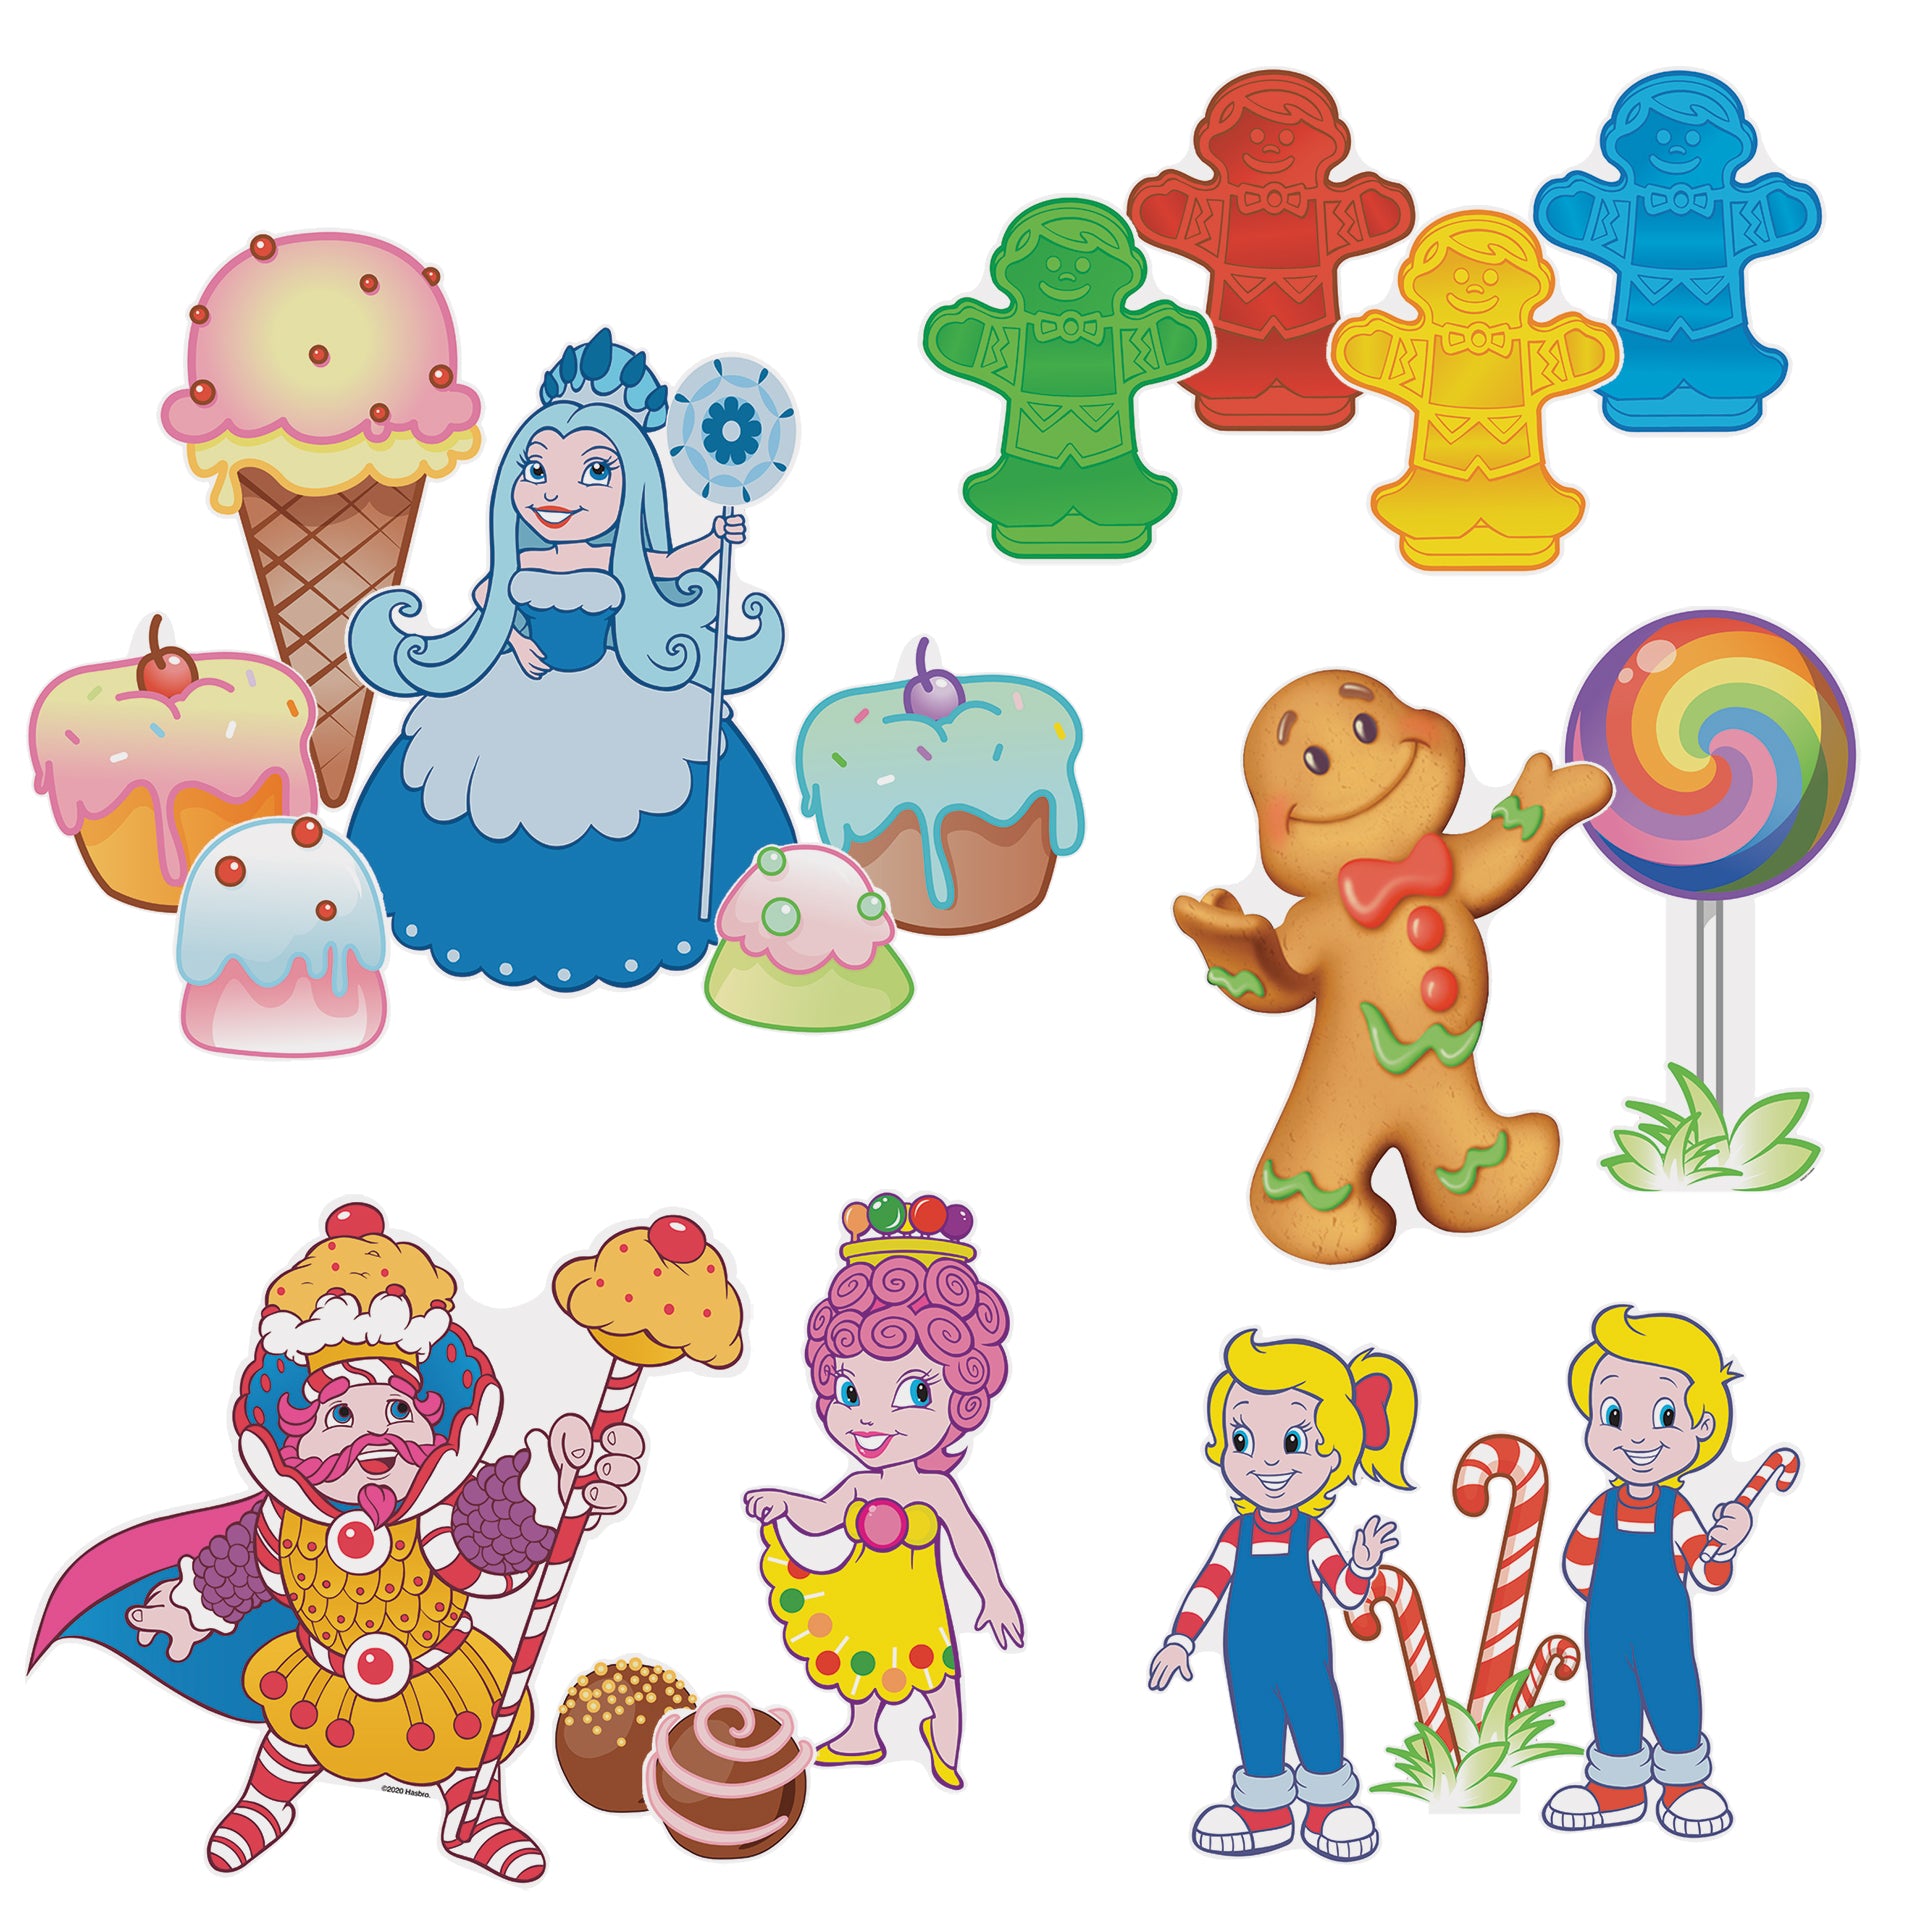 candy land board game 90